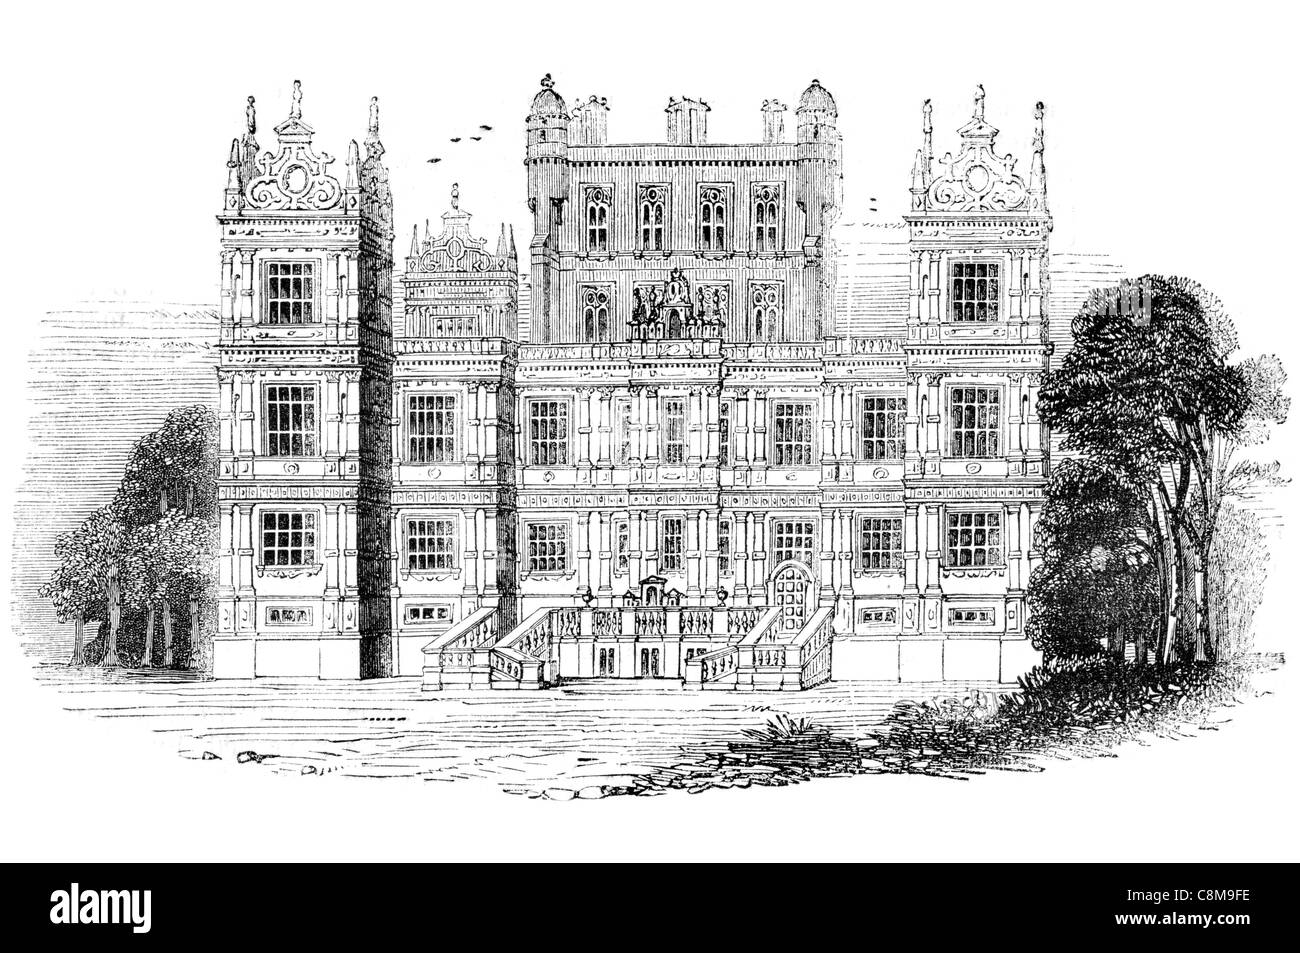 Wollaton Hall country house Nottingham Inghilterra parco del museo di storia naturale Elizabethan Foto Stock